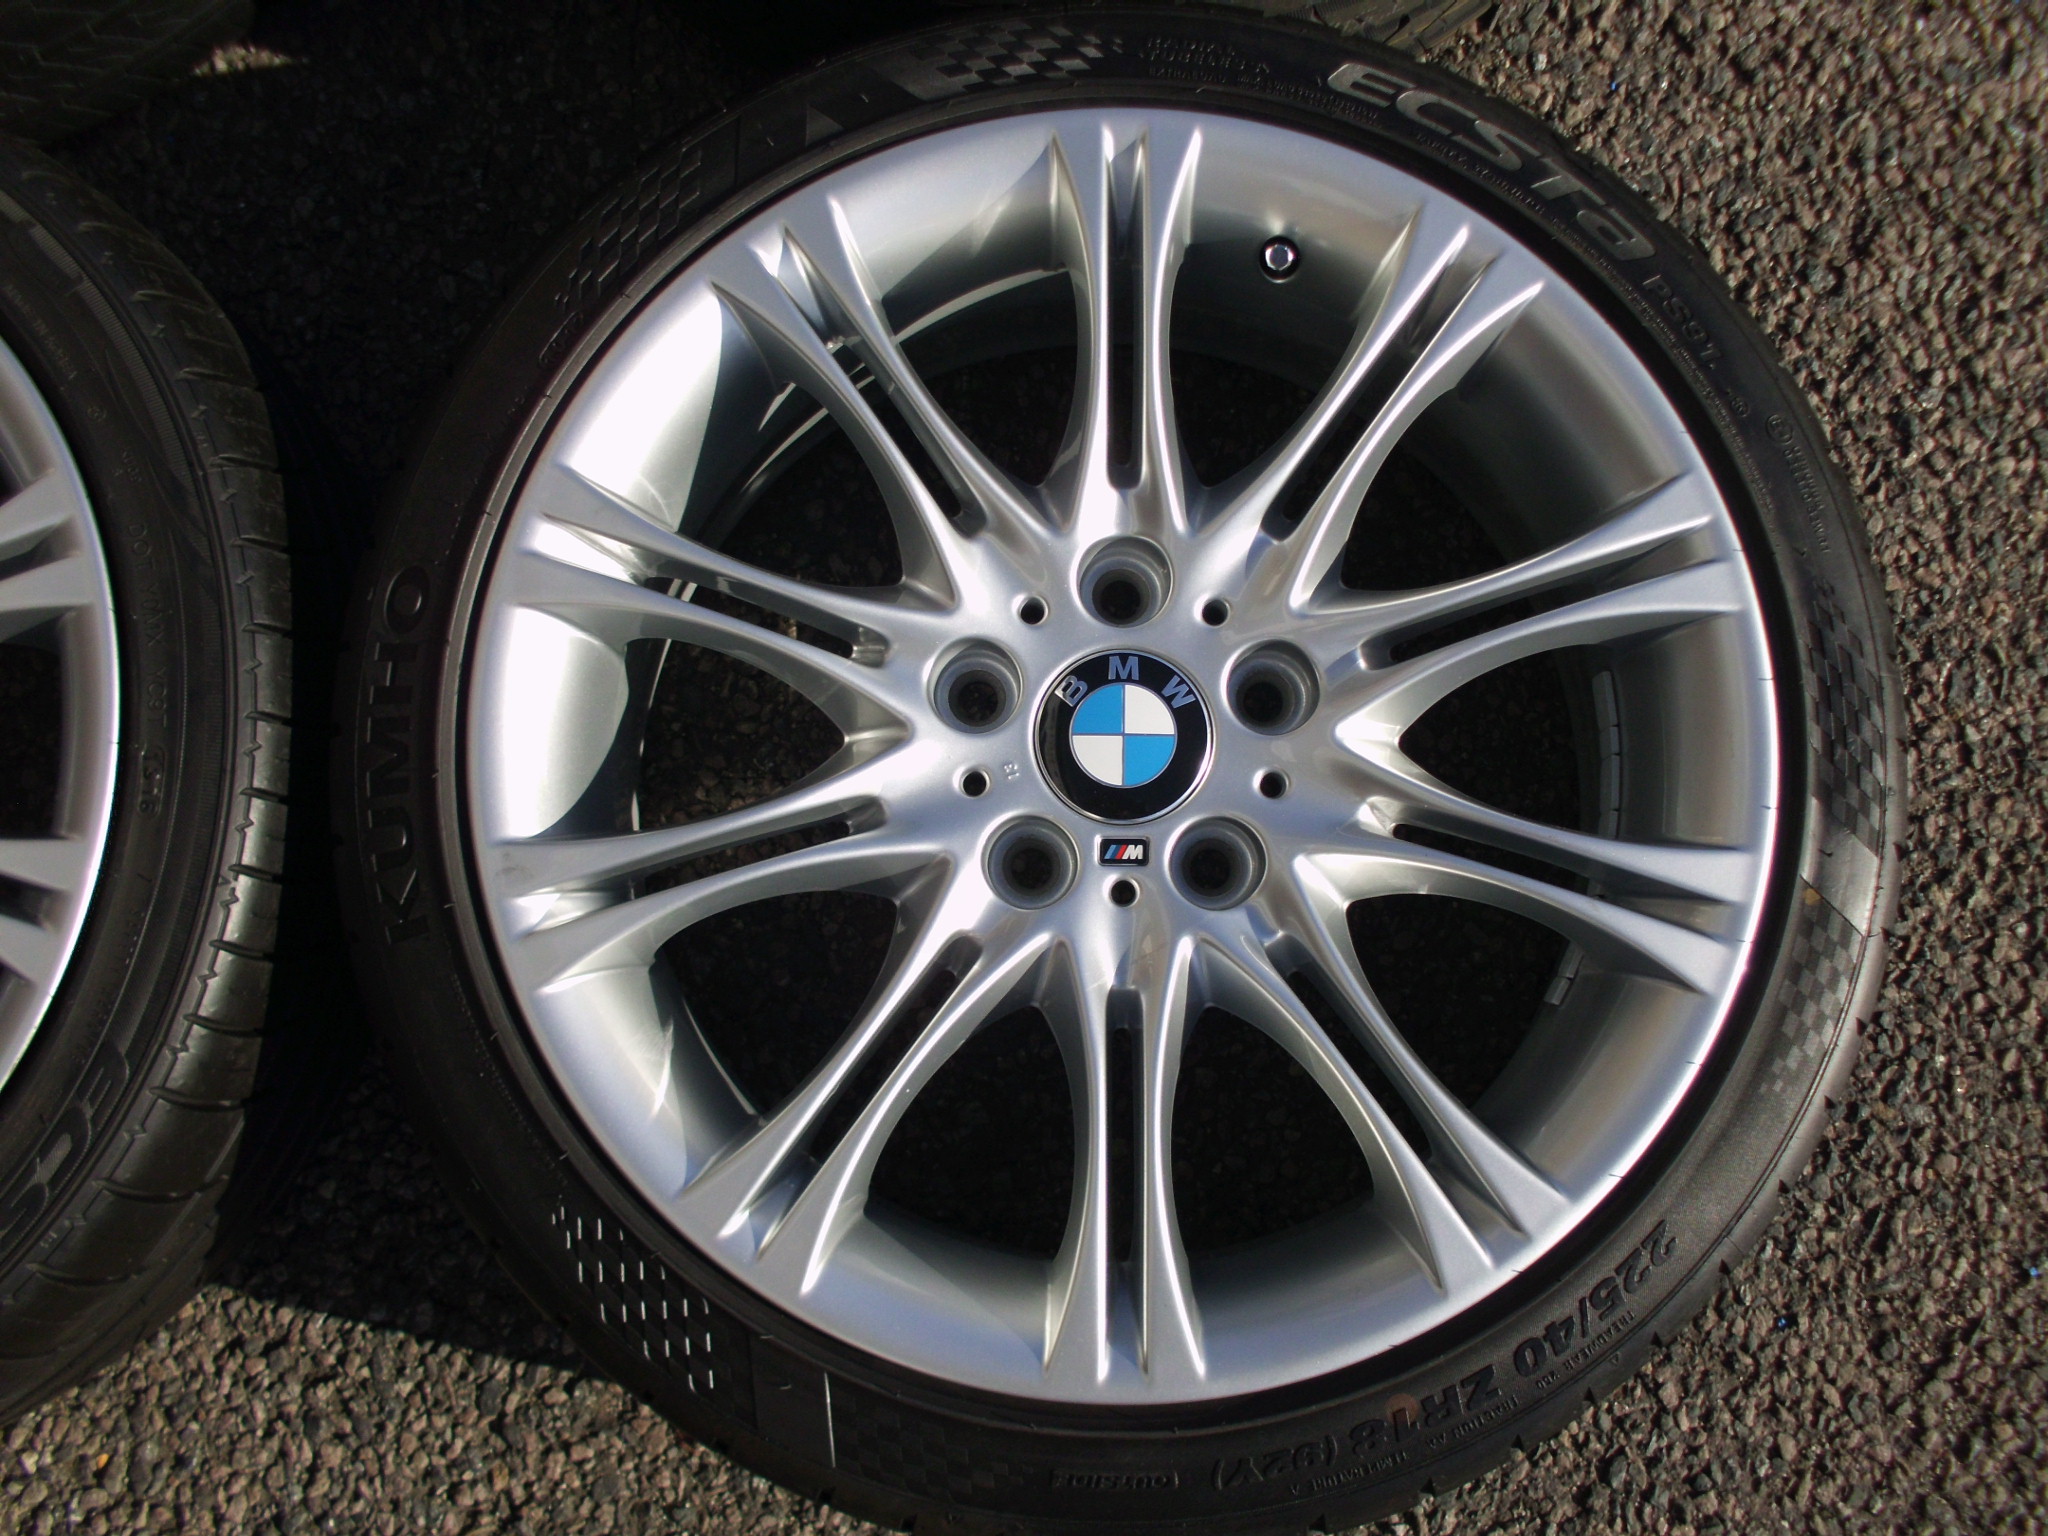 USED 18" GENUINE BMW STYLE 135 E46 MV2 SPORT ALLOY WHEELS,FULLY REFURBED,WIDE REAR INC VG TYRES